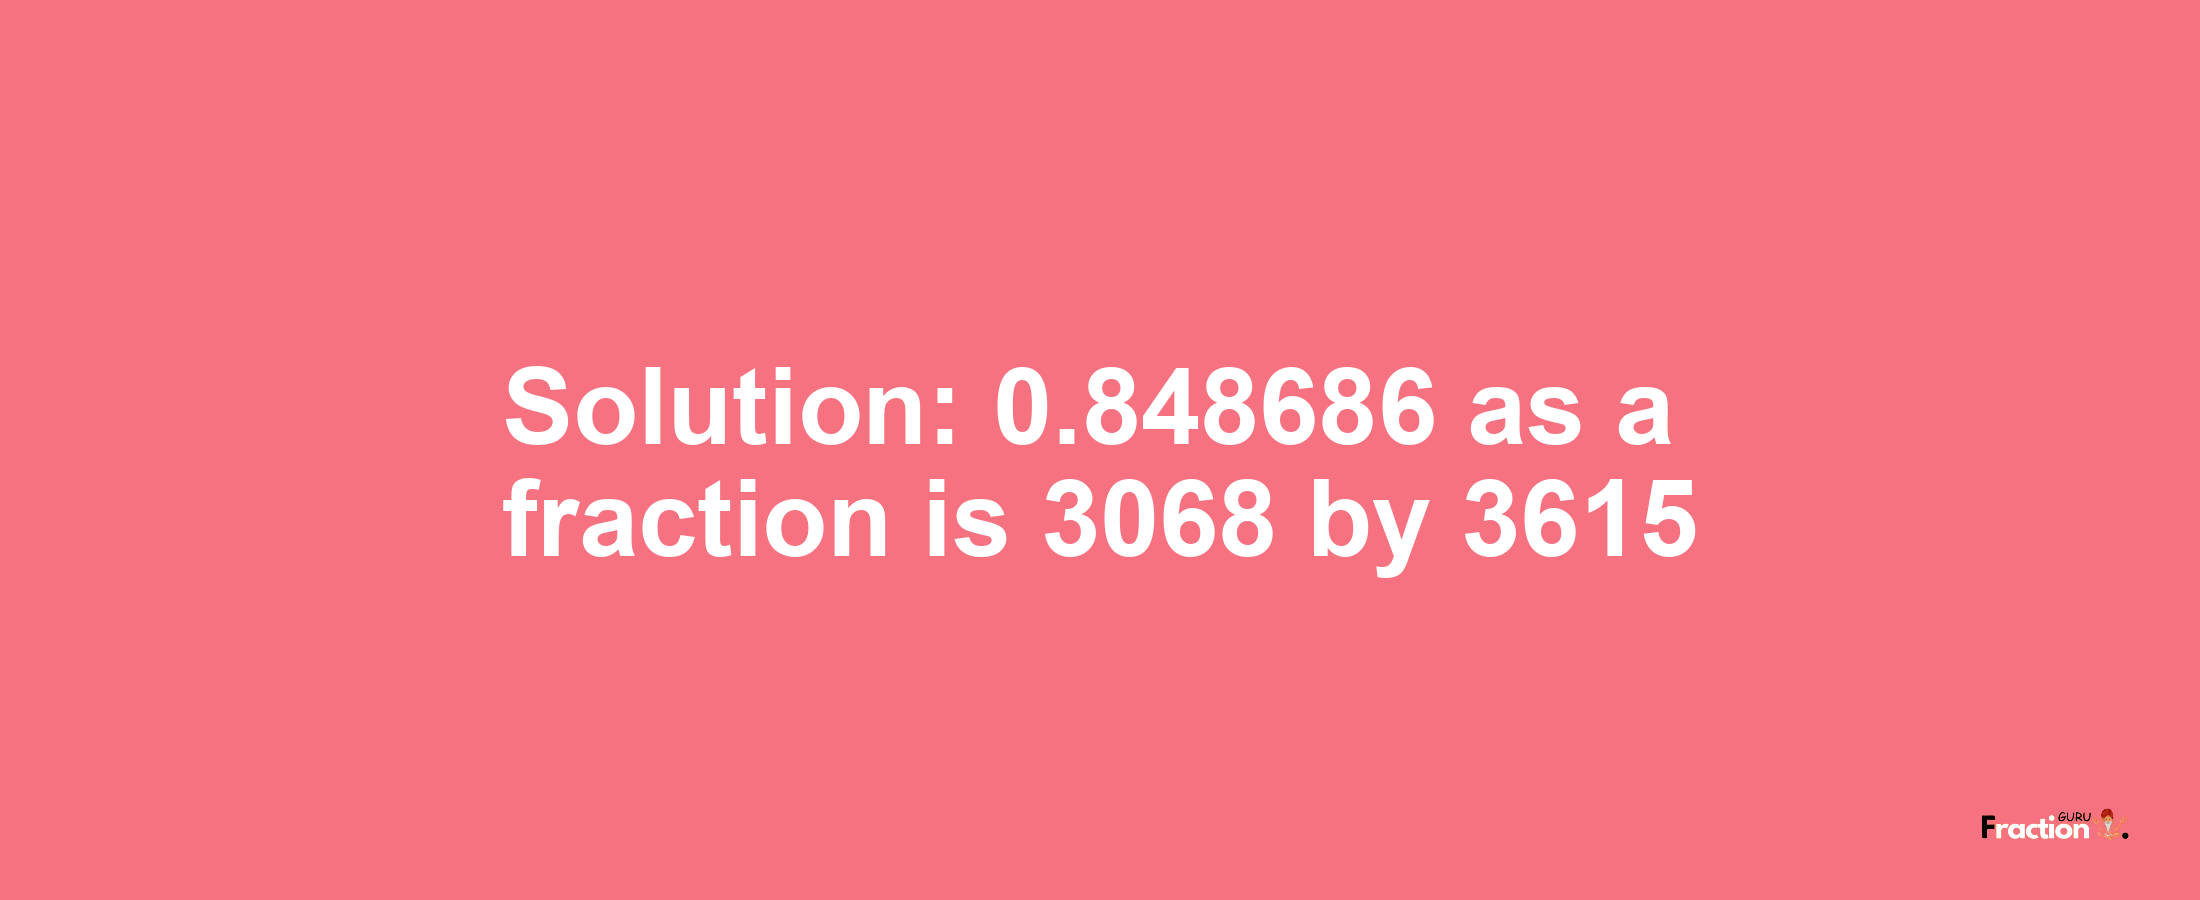 Solution:0.848686 as a fraction is 3068/3615